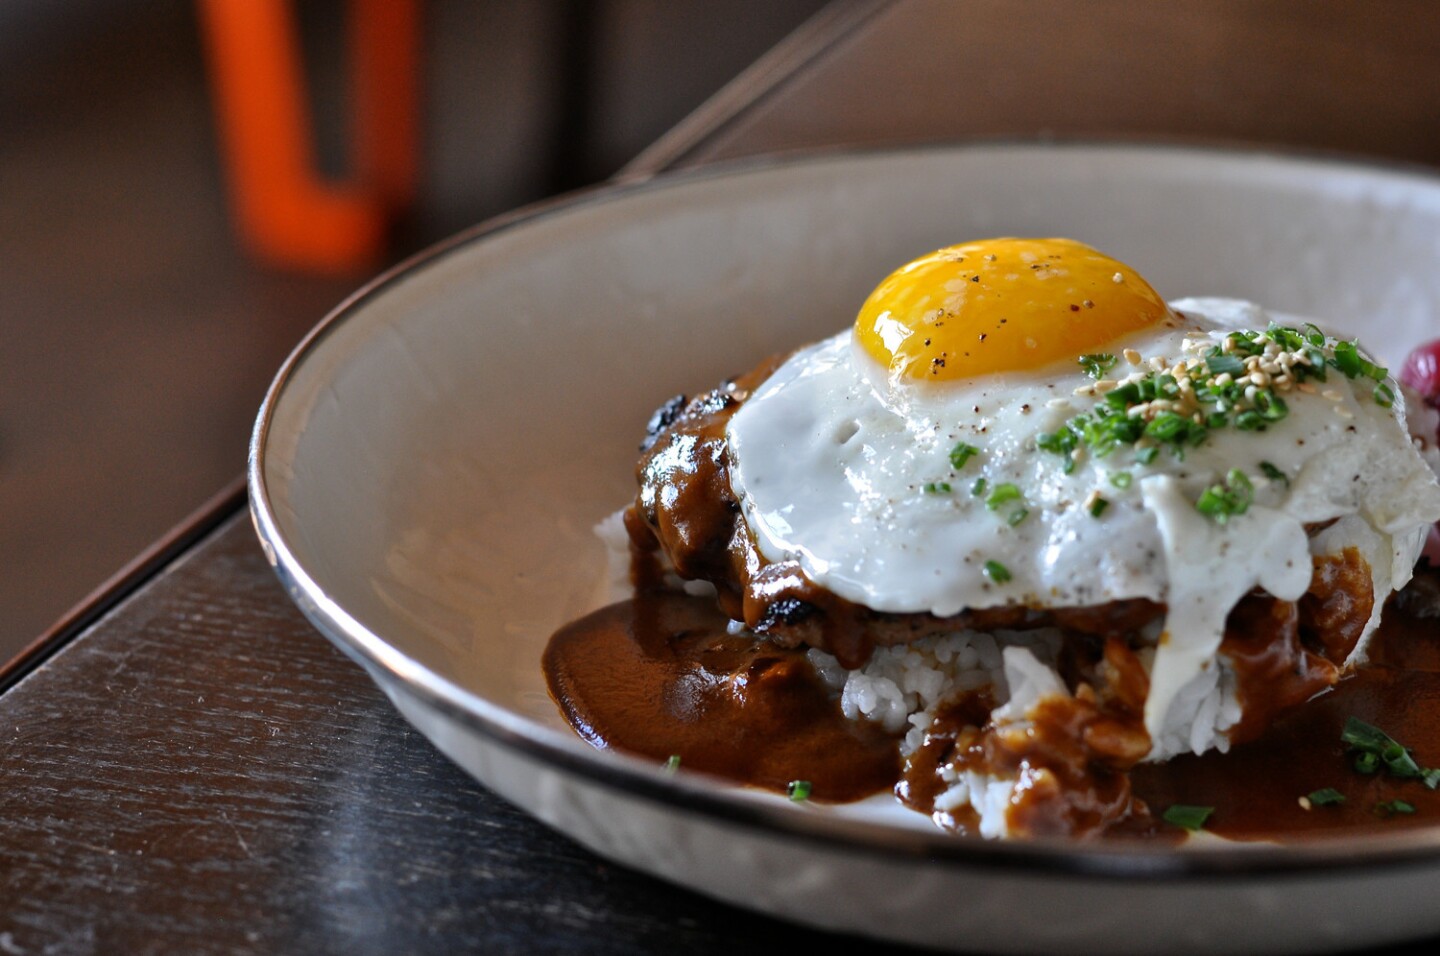 A-Frame's Loco Moco, with "hambagu" steak, rice, curry gravy, egg and pickled pearl onions, is shown.